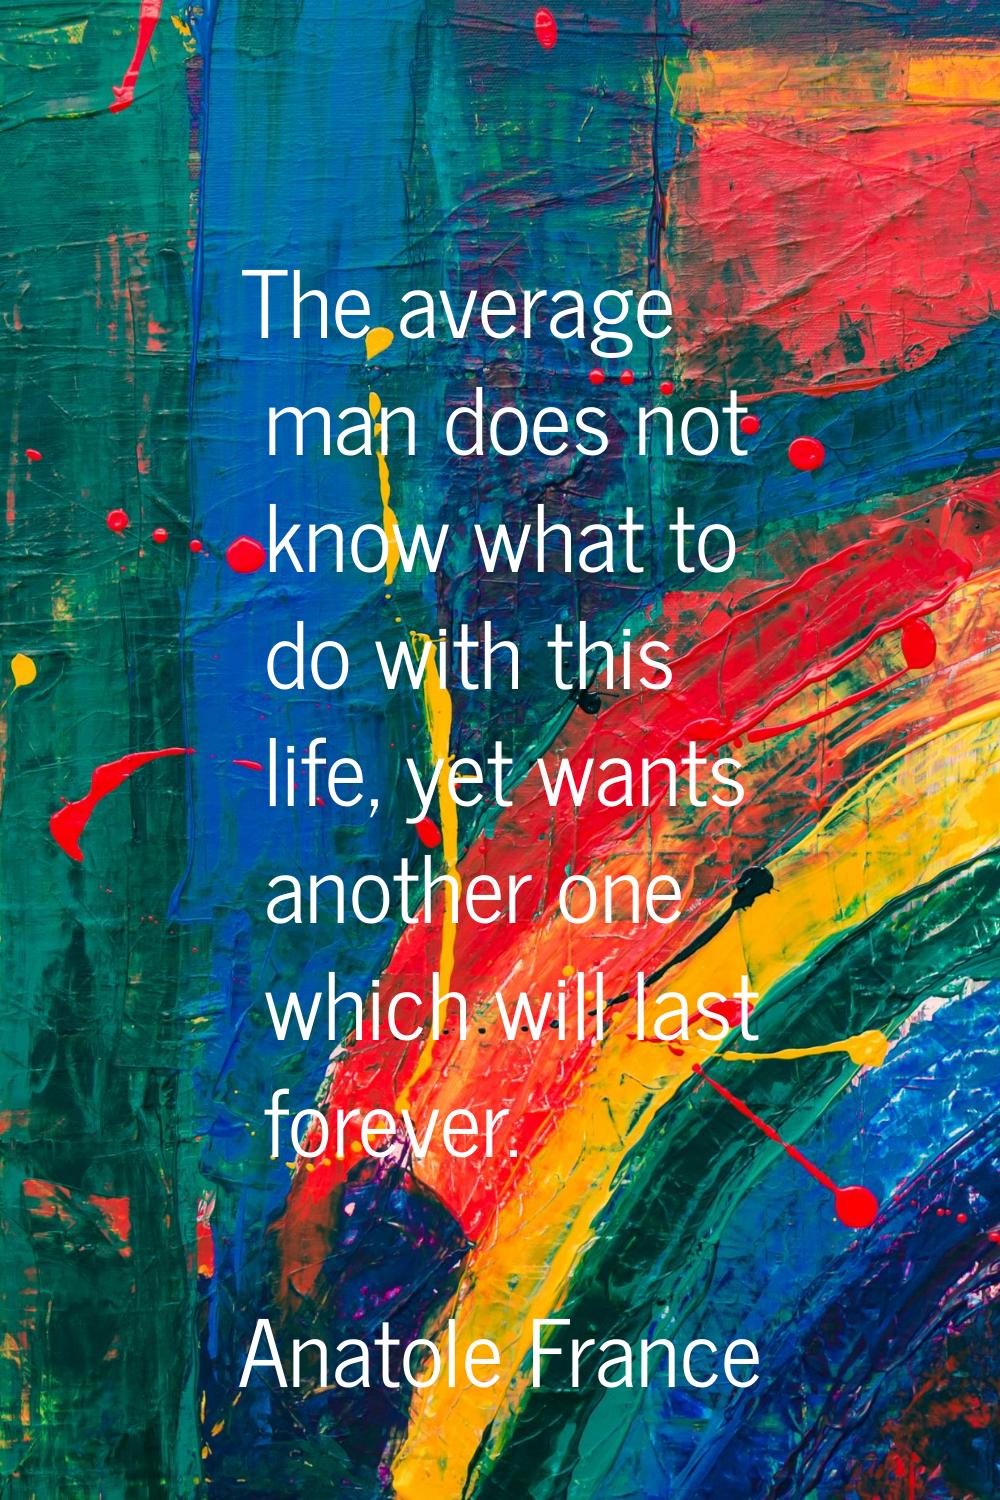 The average man does not know what to do with this life, yet wants another one which will last fore